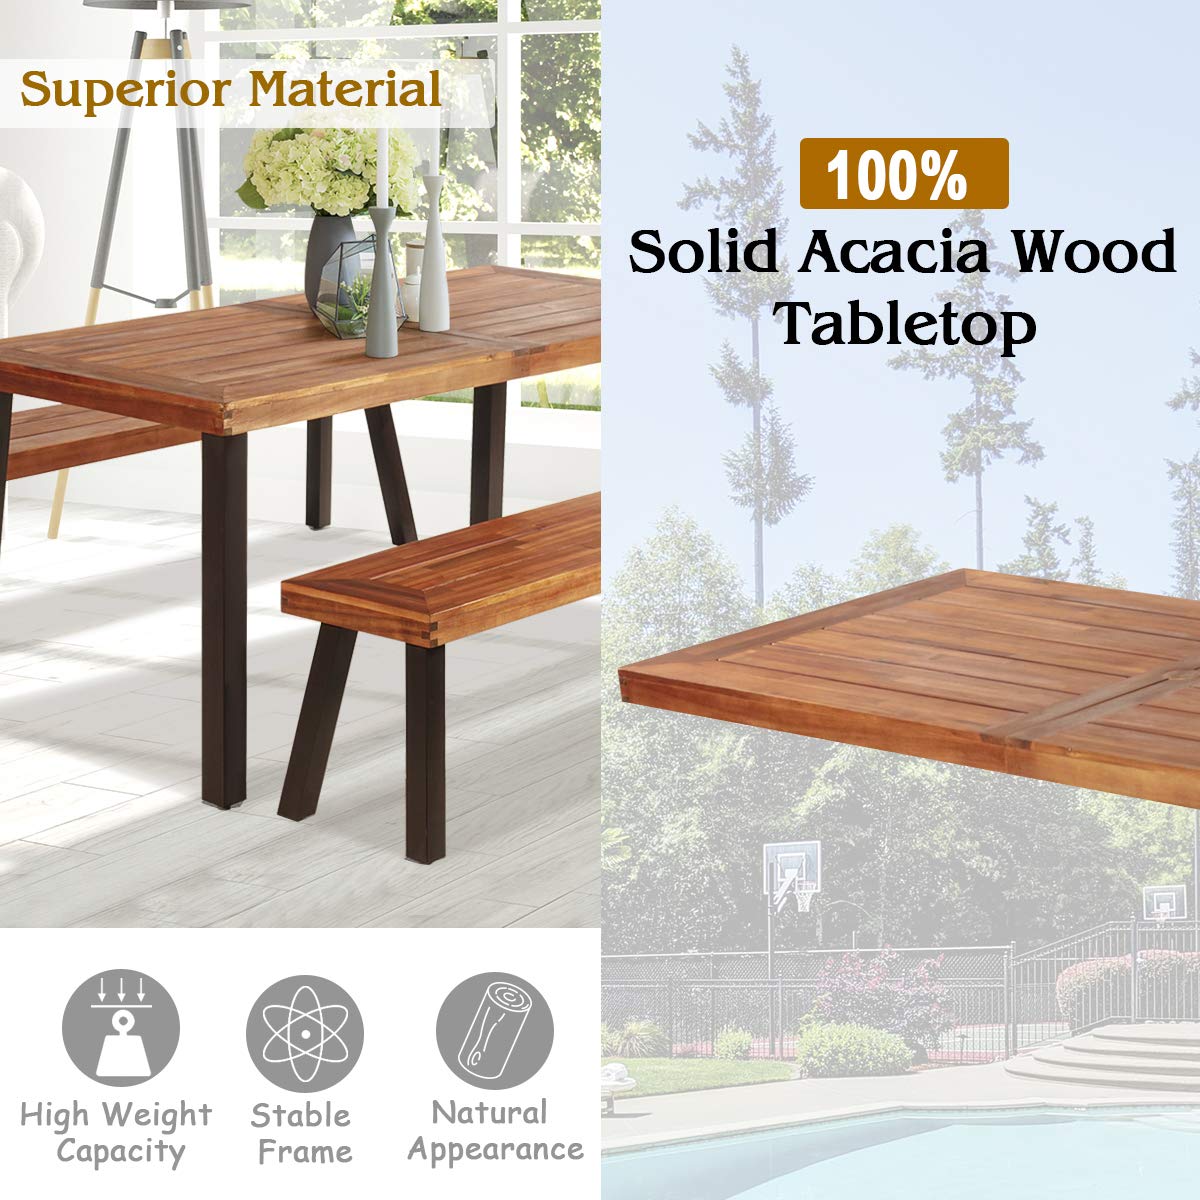 Patio Dining Table Set with 2 Benches, Outdoor Picnic Table Set with Umbrella Hole